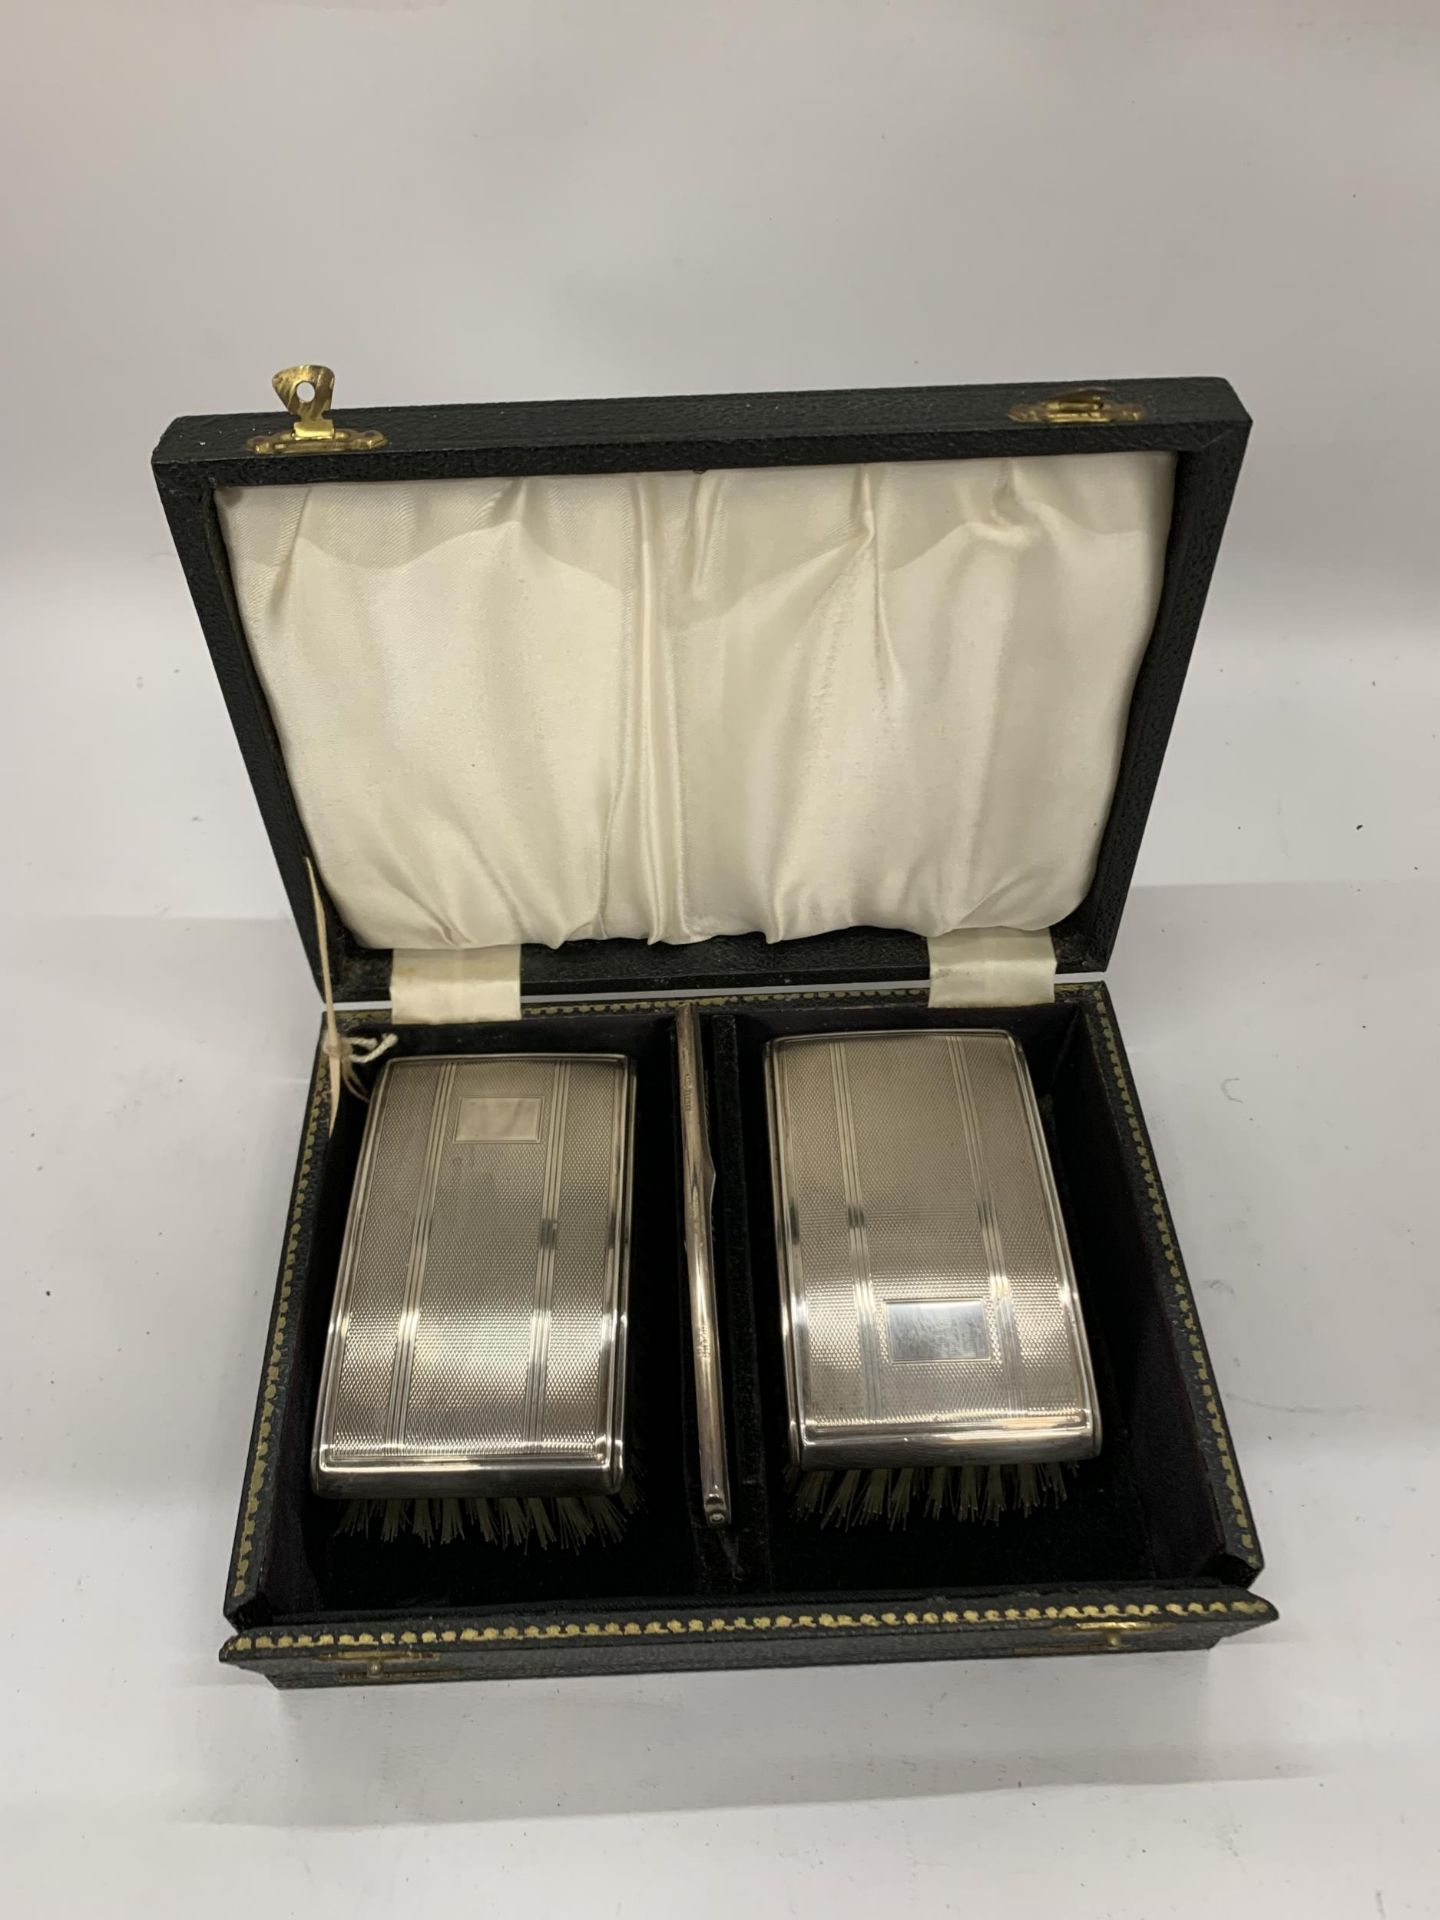 A VINTAGE CASED BIRMINGHAM HALLMARKED SILVER TWIN BRUSH AND COMB SET